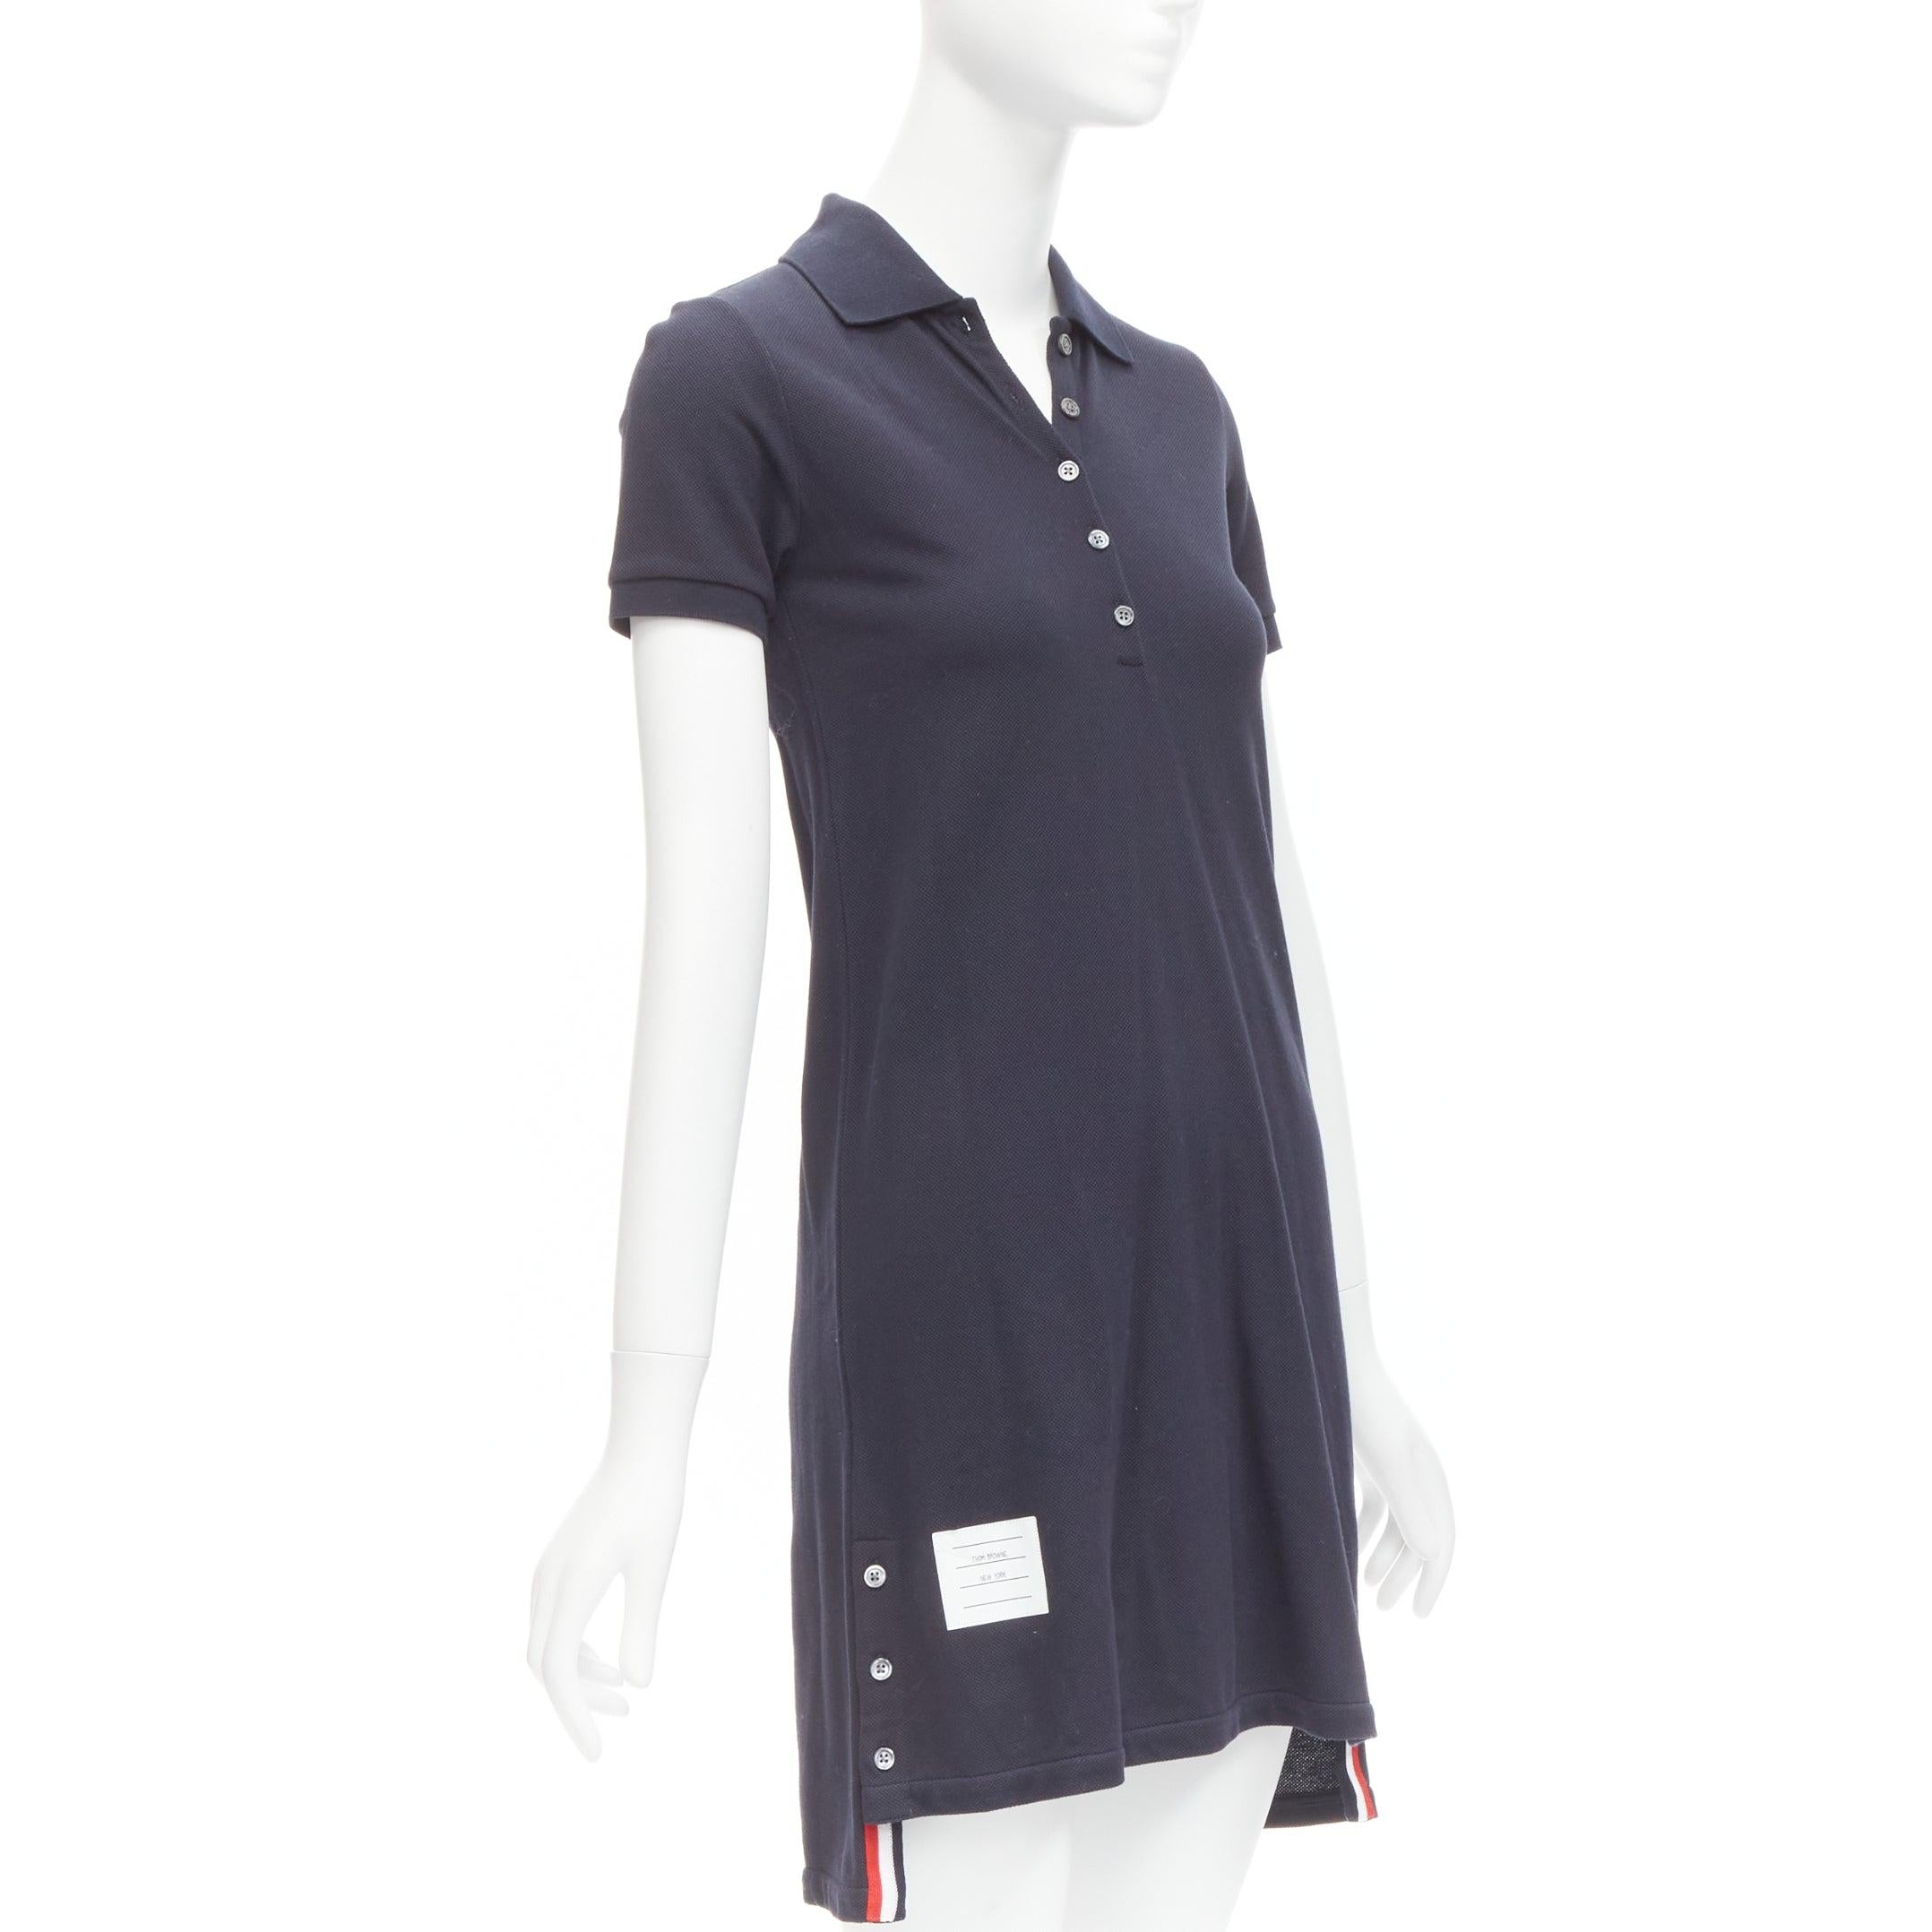 THOM BROWNE navy blue signature stripe webbing pique polo dress IT36 XXS
Reference: LNKO/A02214
Brand: Thom Browne
Designer: Thom Browne
Material: Cotton
Color: Navy
Pattern: Solid
Closure: Button
Extra Details: TB webbing detail at back.
Made in: